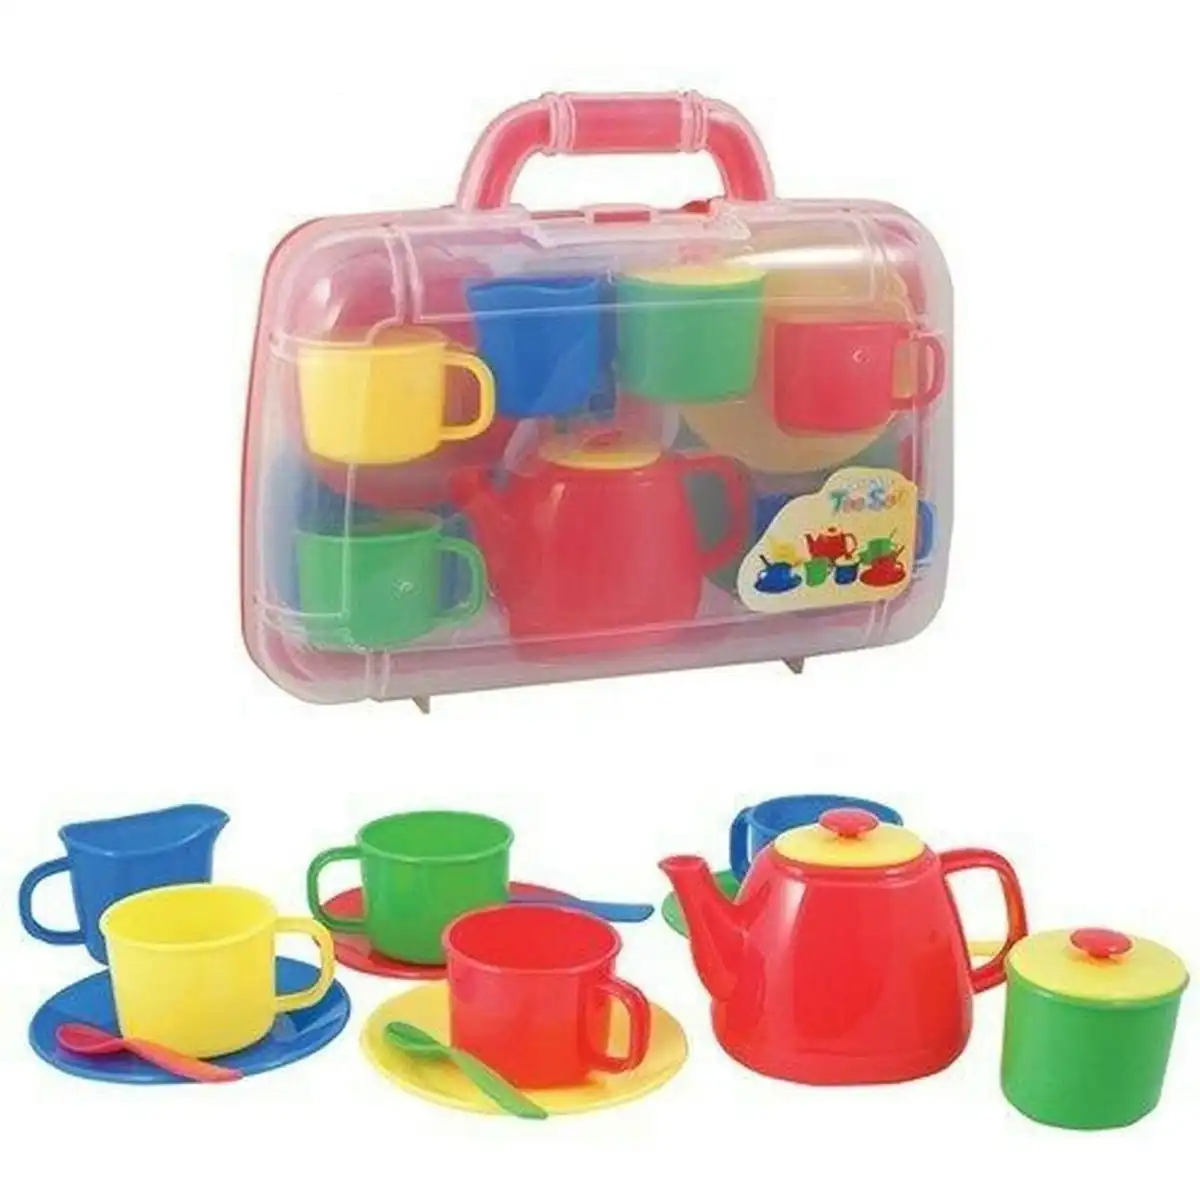 Portable Tea Set And Carry Case